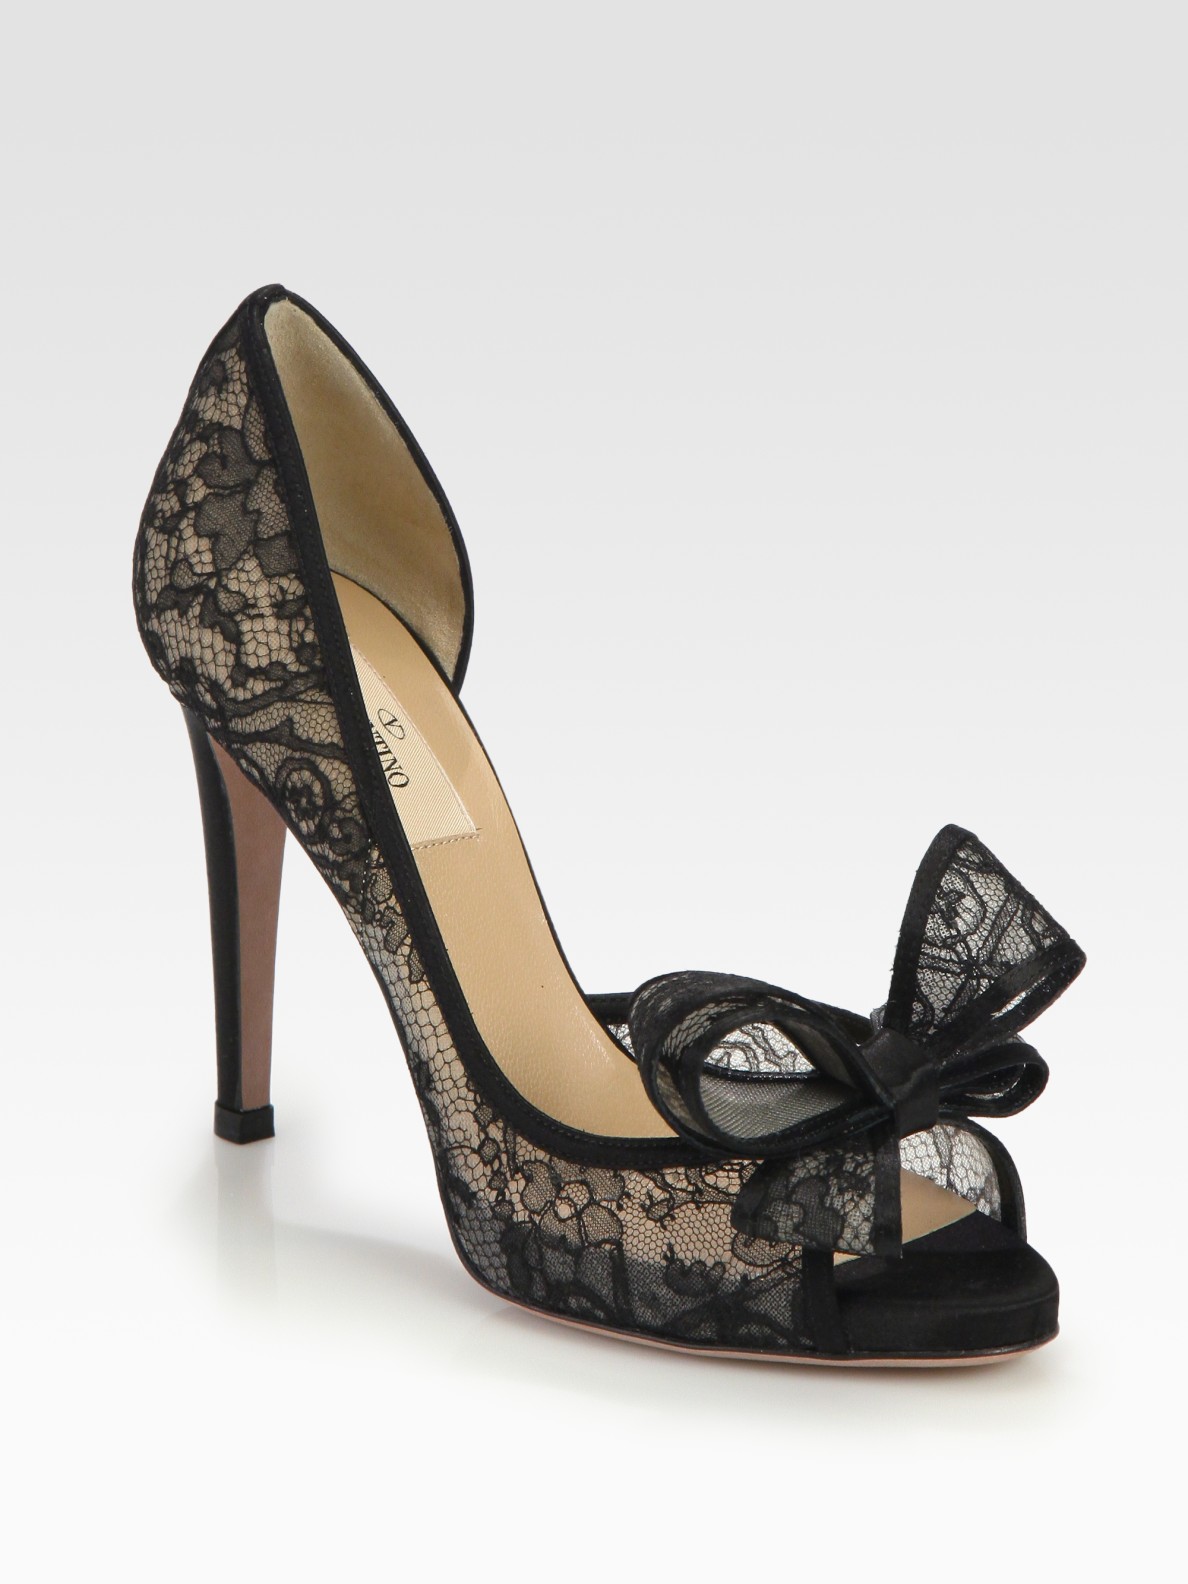 Lyst - Valentino Lace Couture Bow Dorsay Pumps in Black